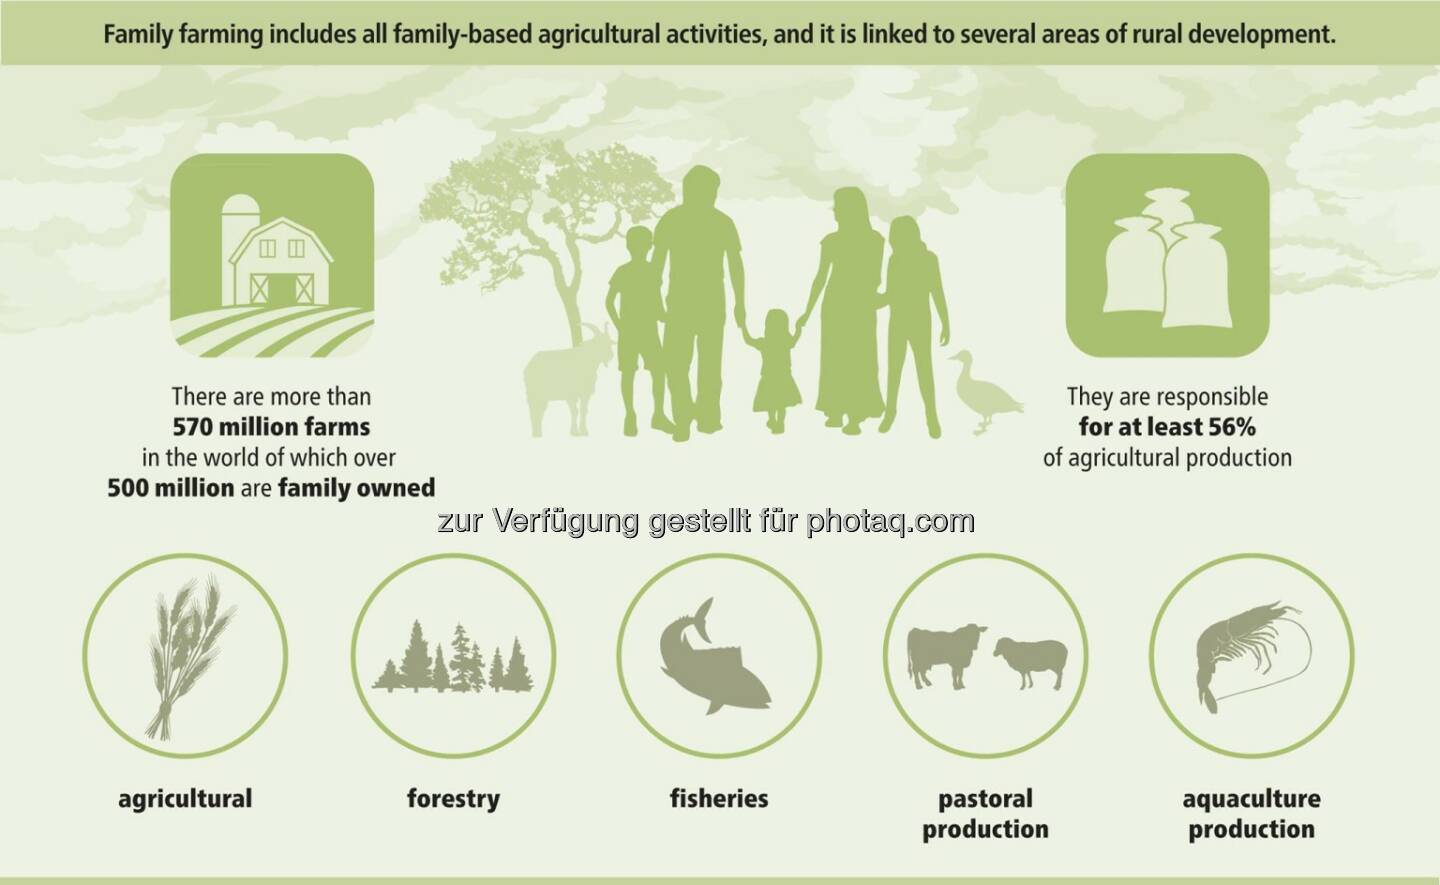 Bayer Infographic: There are more than 570 million farms in the world of which over 500 million are family owned.  Source: http://facebook.com/Bayer